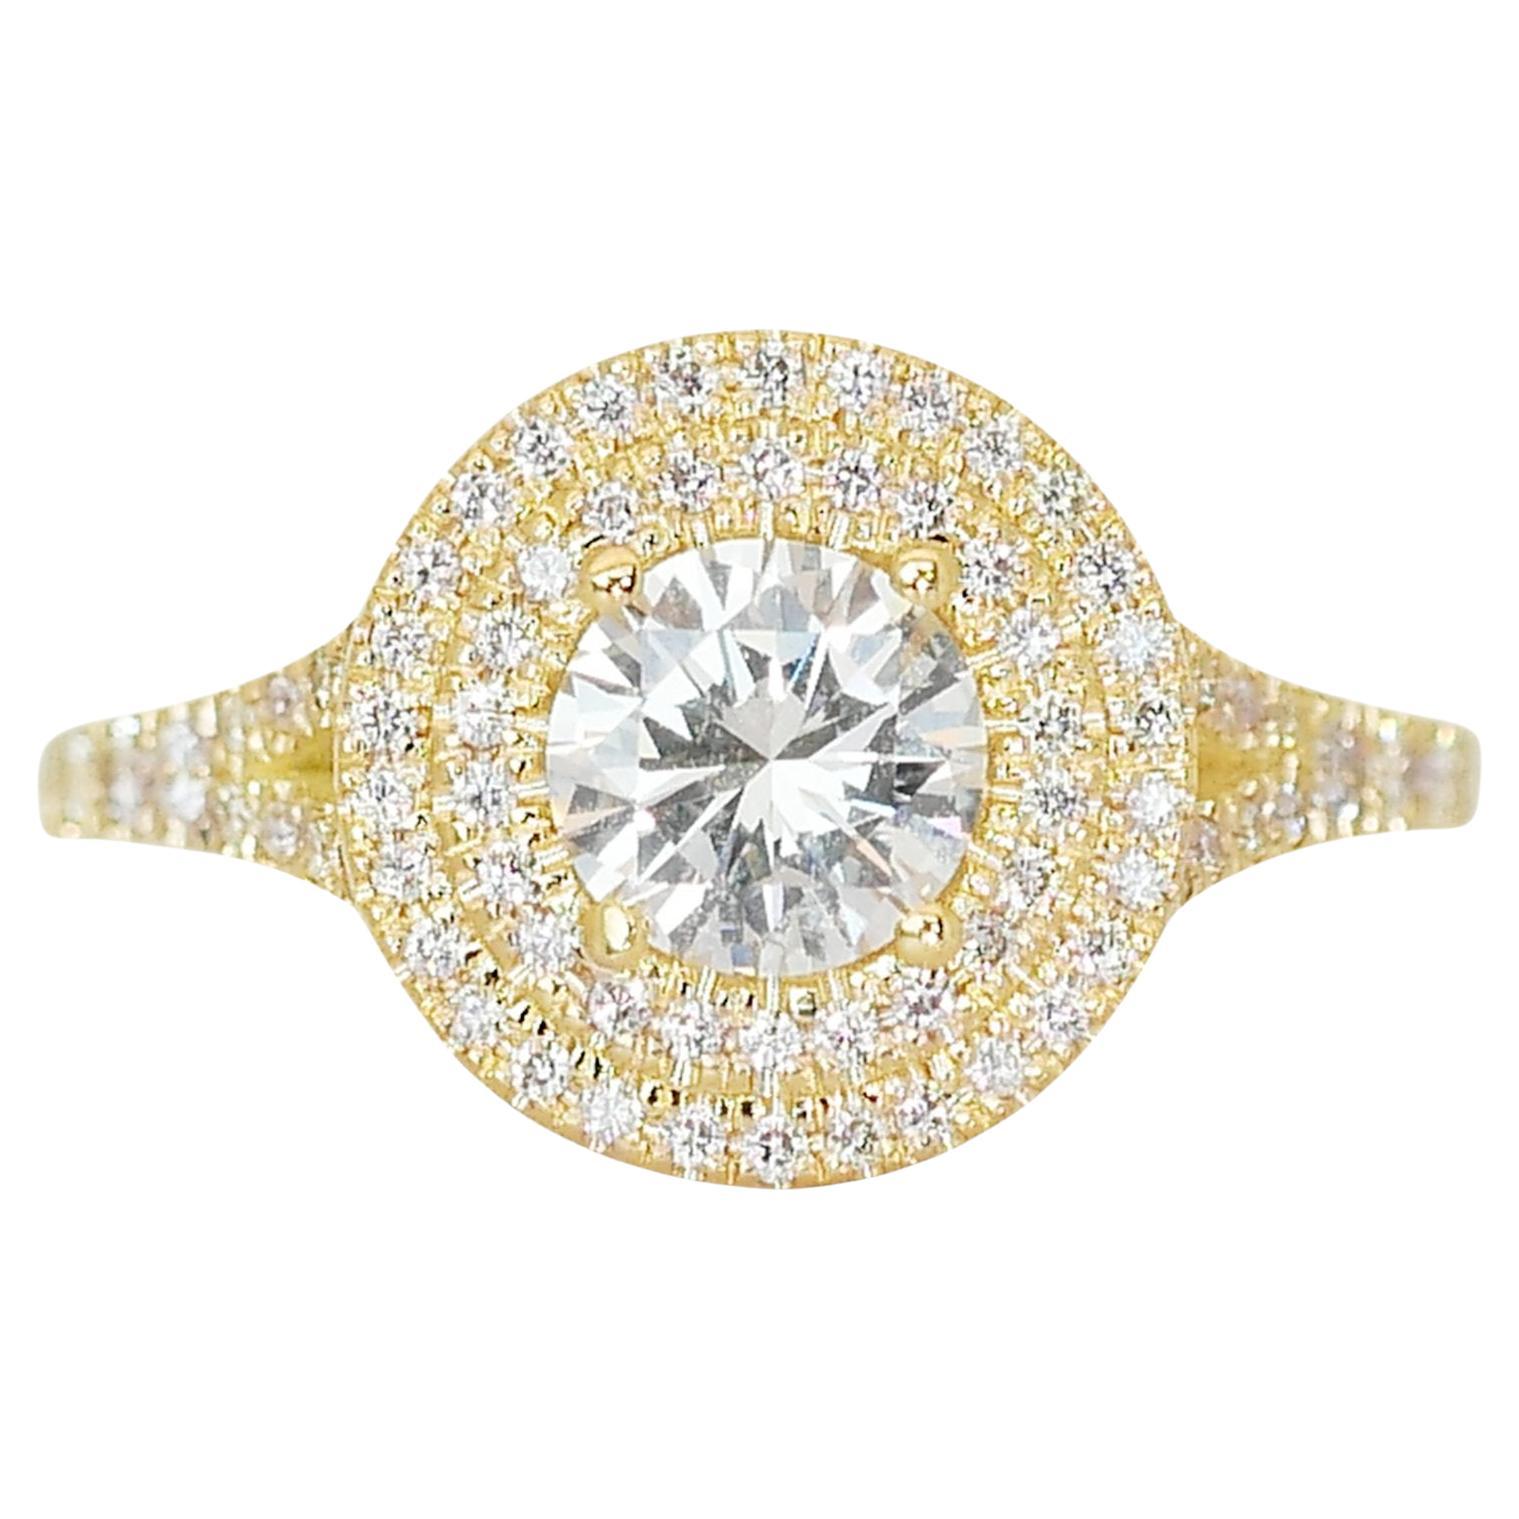 Exquisite 1.44ct Diamond Double Halo Ring in 18k Yellow Gold - GIA Certified For Sale